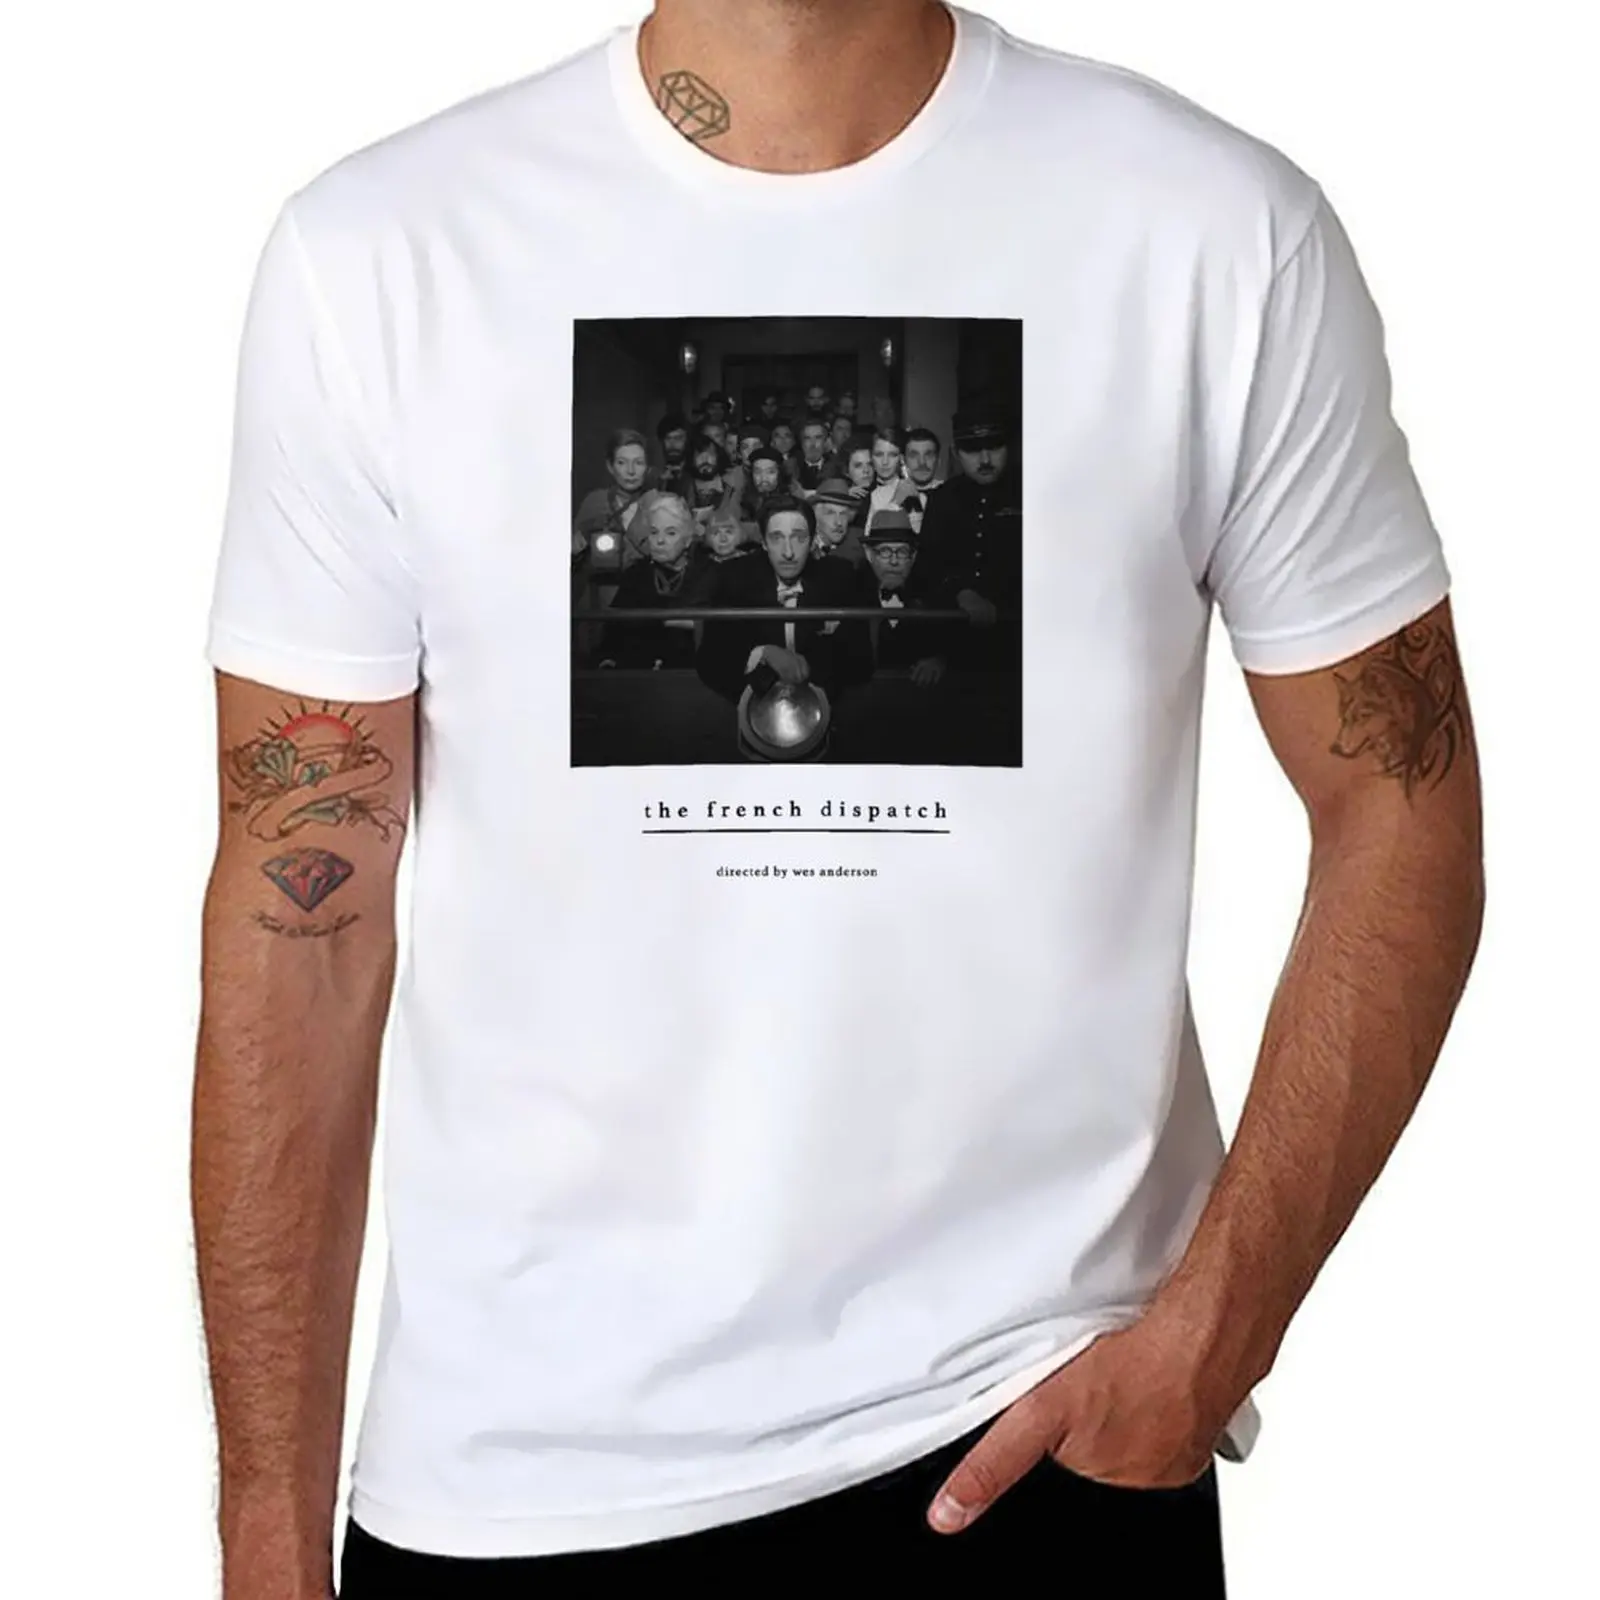 The French Dispatch (Wes Anderson) Timothee Chalamet, Saoirse Ronan, Adrien Brody T-Shirt plus size tops mens plain t shirts